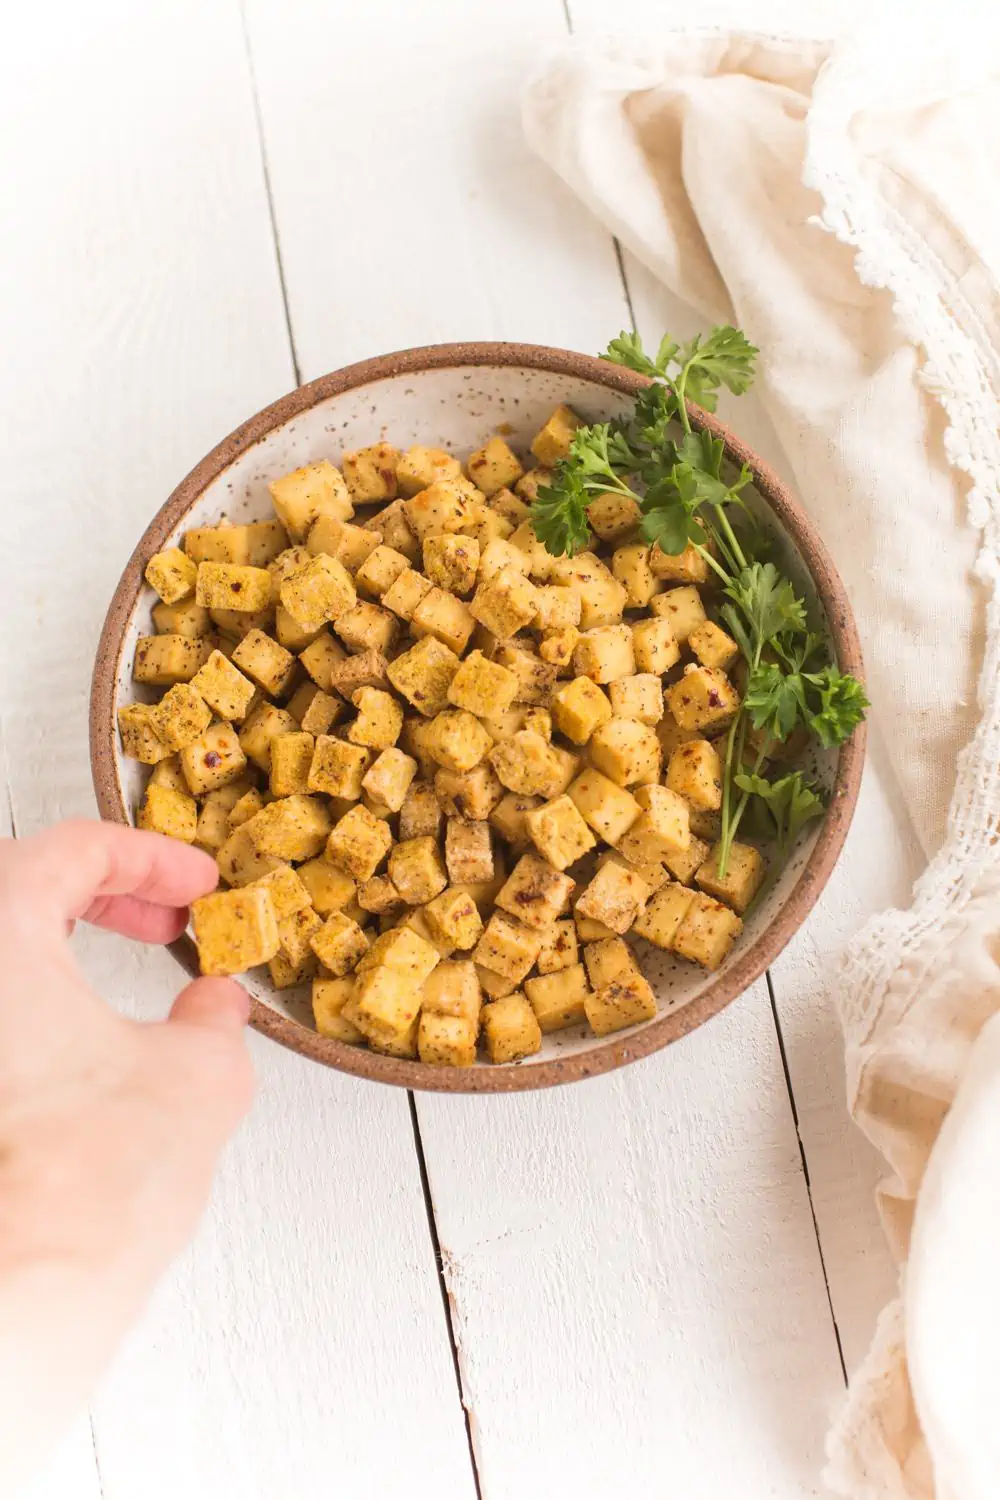 bowl of air fried tofu with parsley garnish and a hand on the left taking a piece